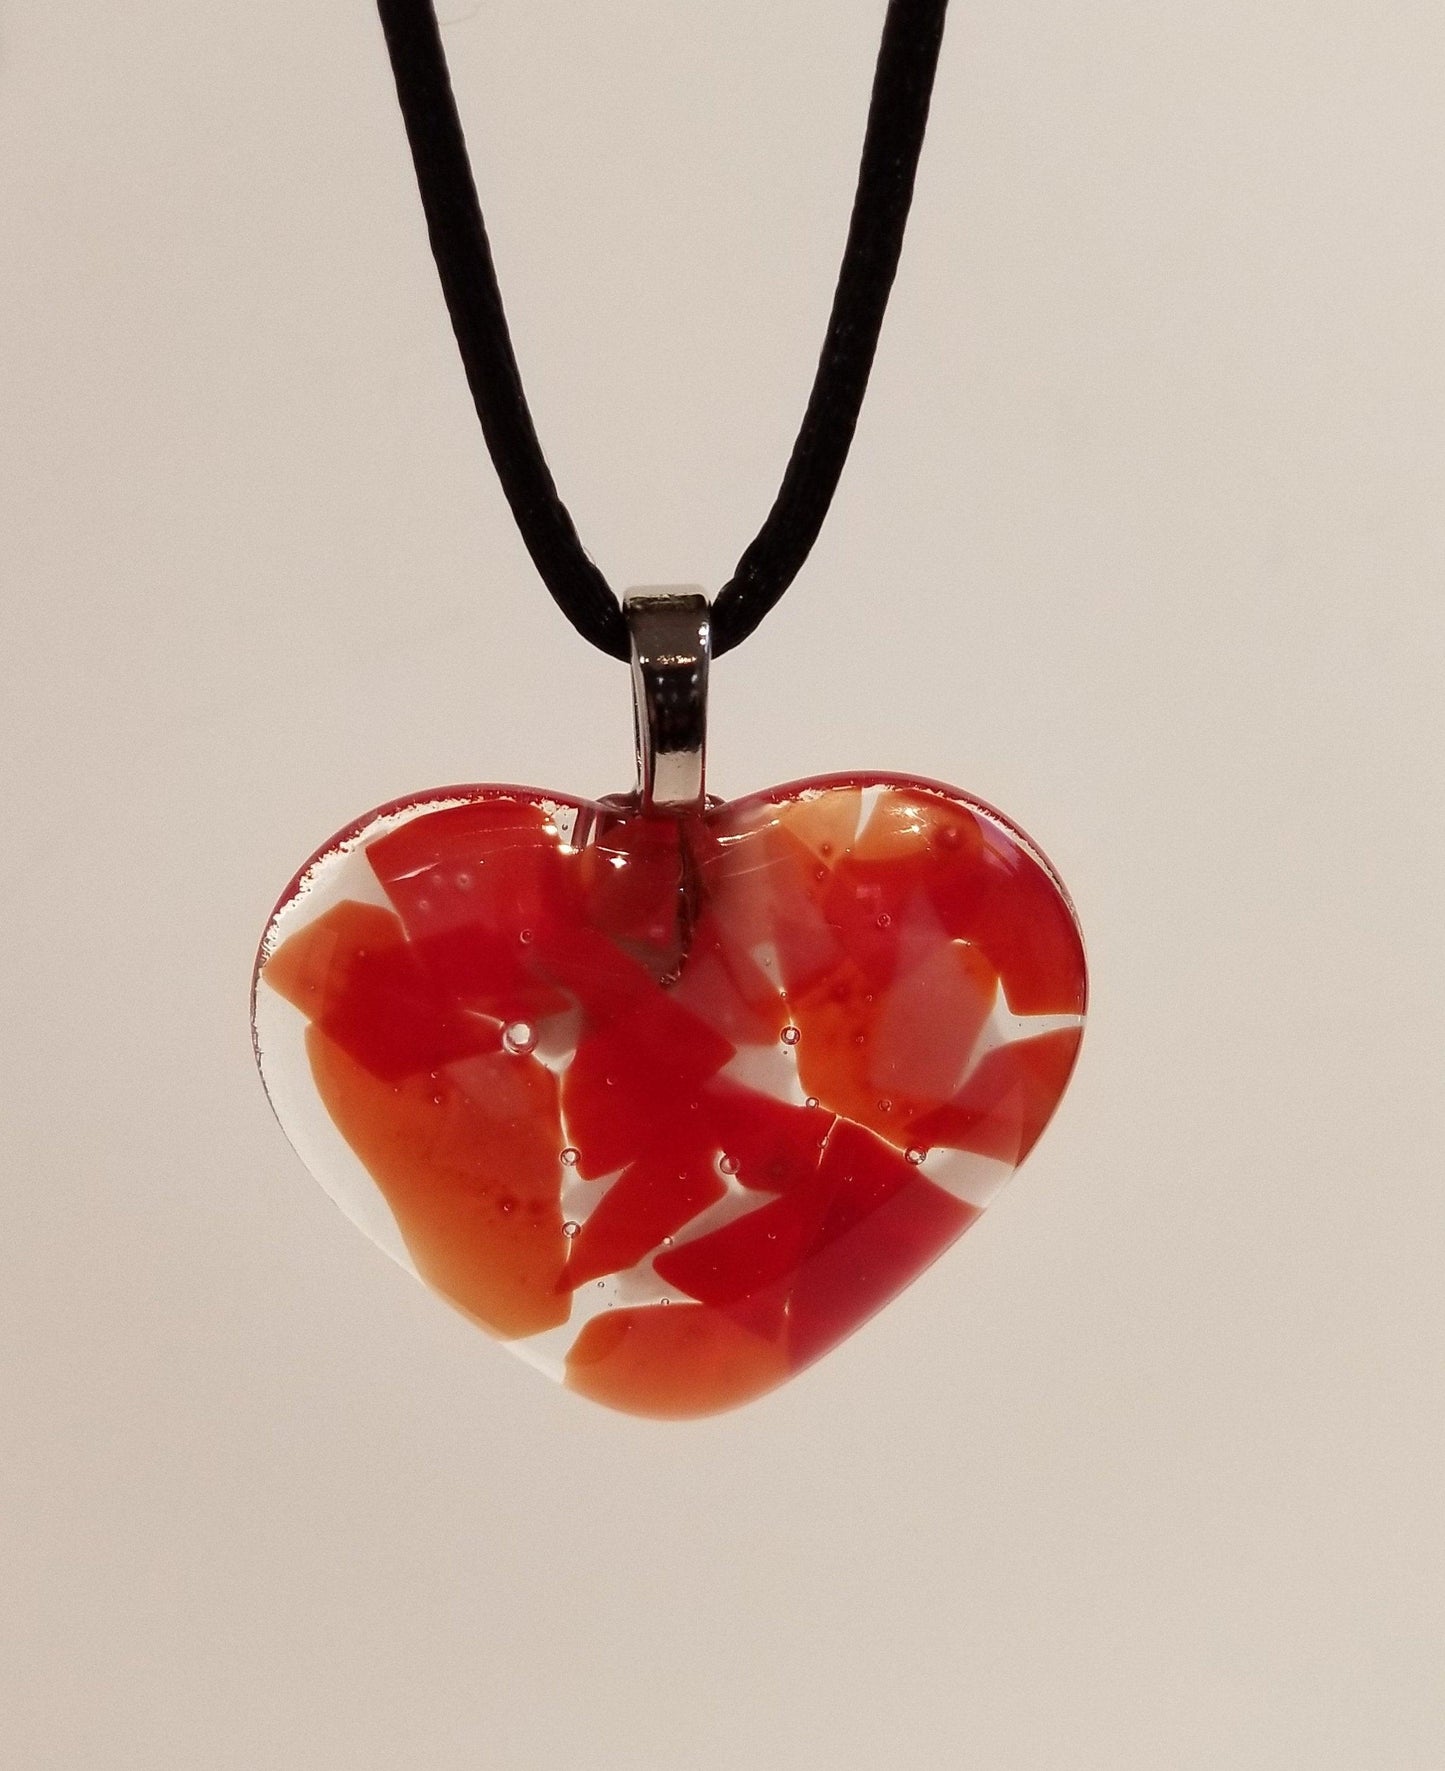 Shades of red fused Glass Heart Pendant necklace on 18 inch stainless steel chain